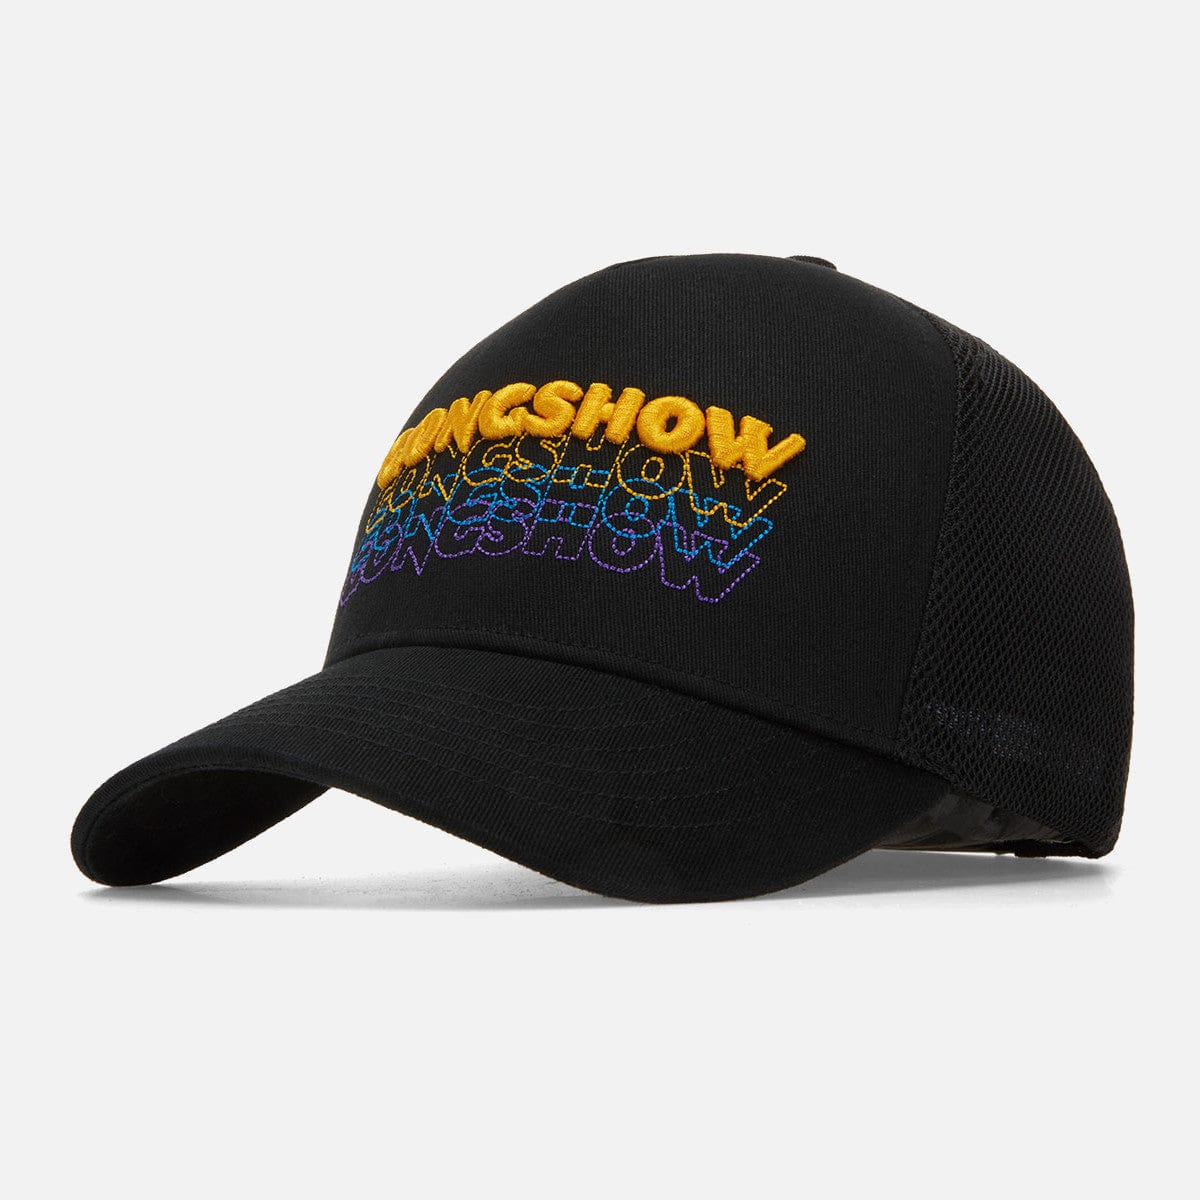 Gongshow Hockey Seeing Double Snapback Hat